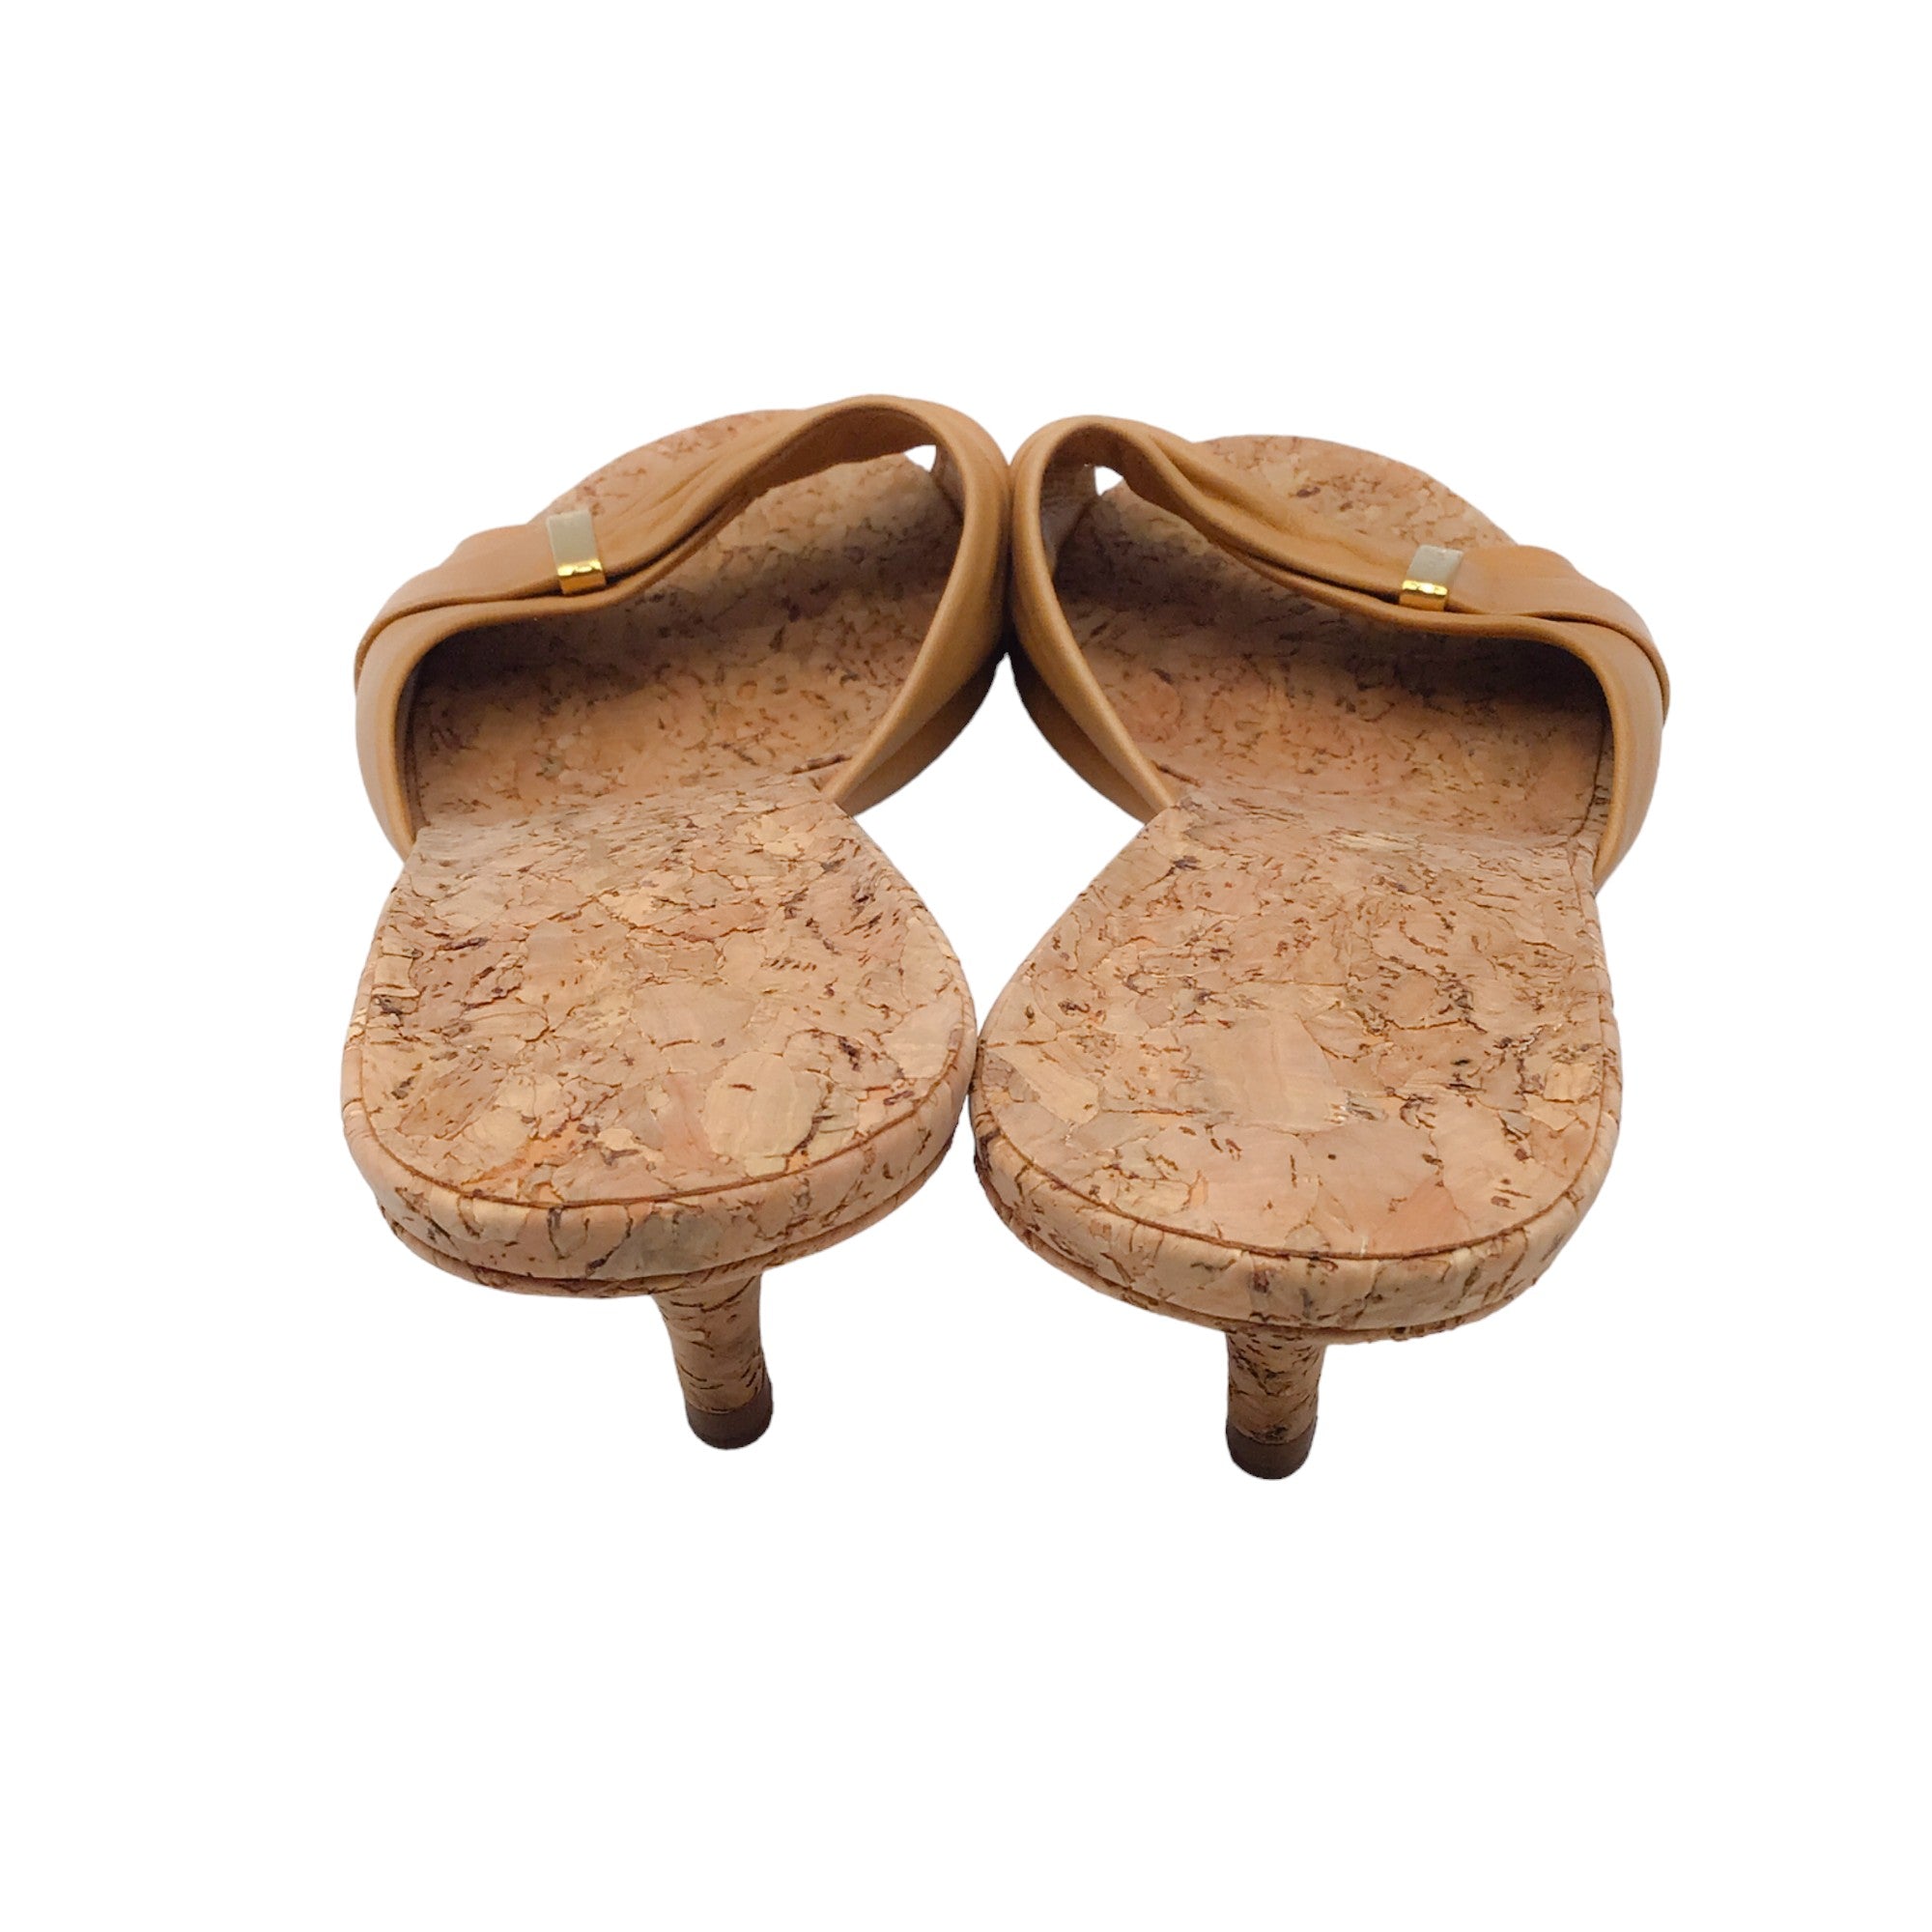 Chanel Tan Leather and Cork Kitten Heel Sandals